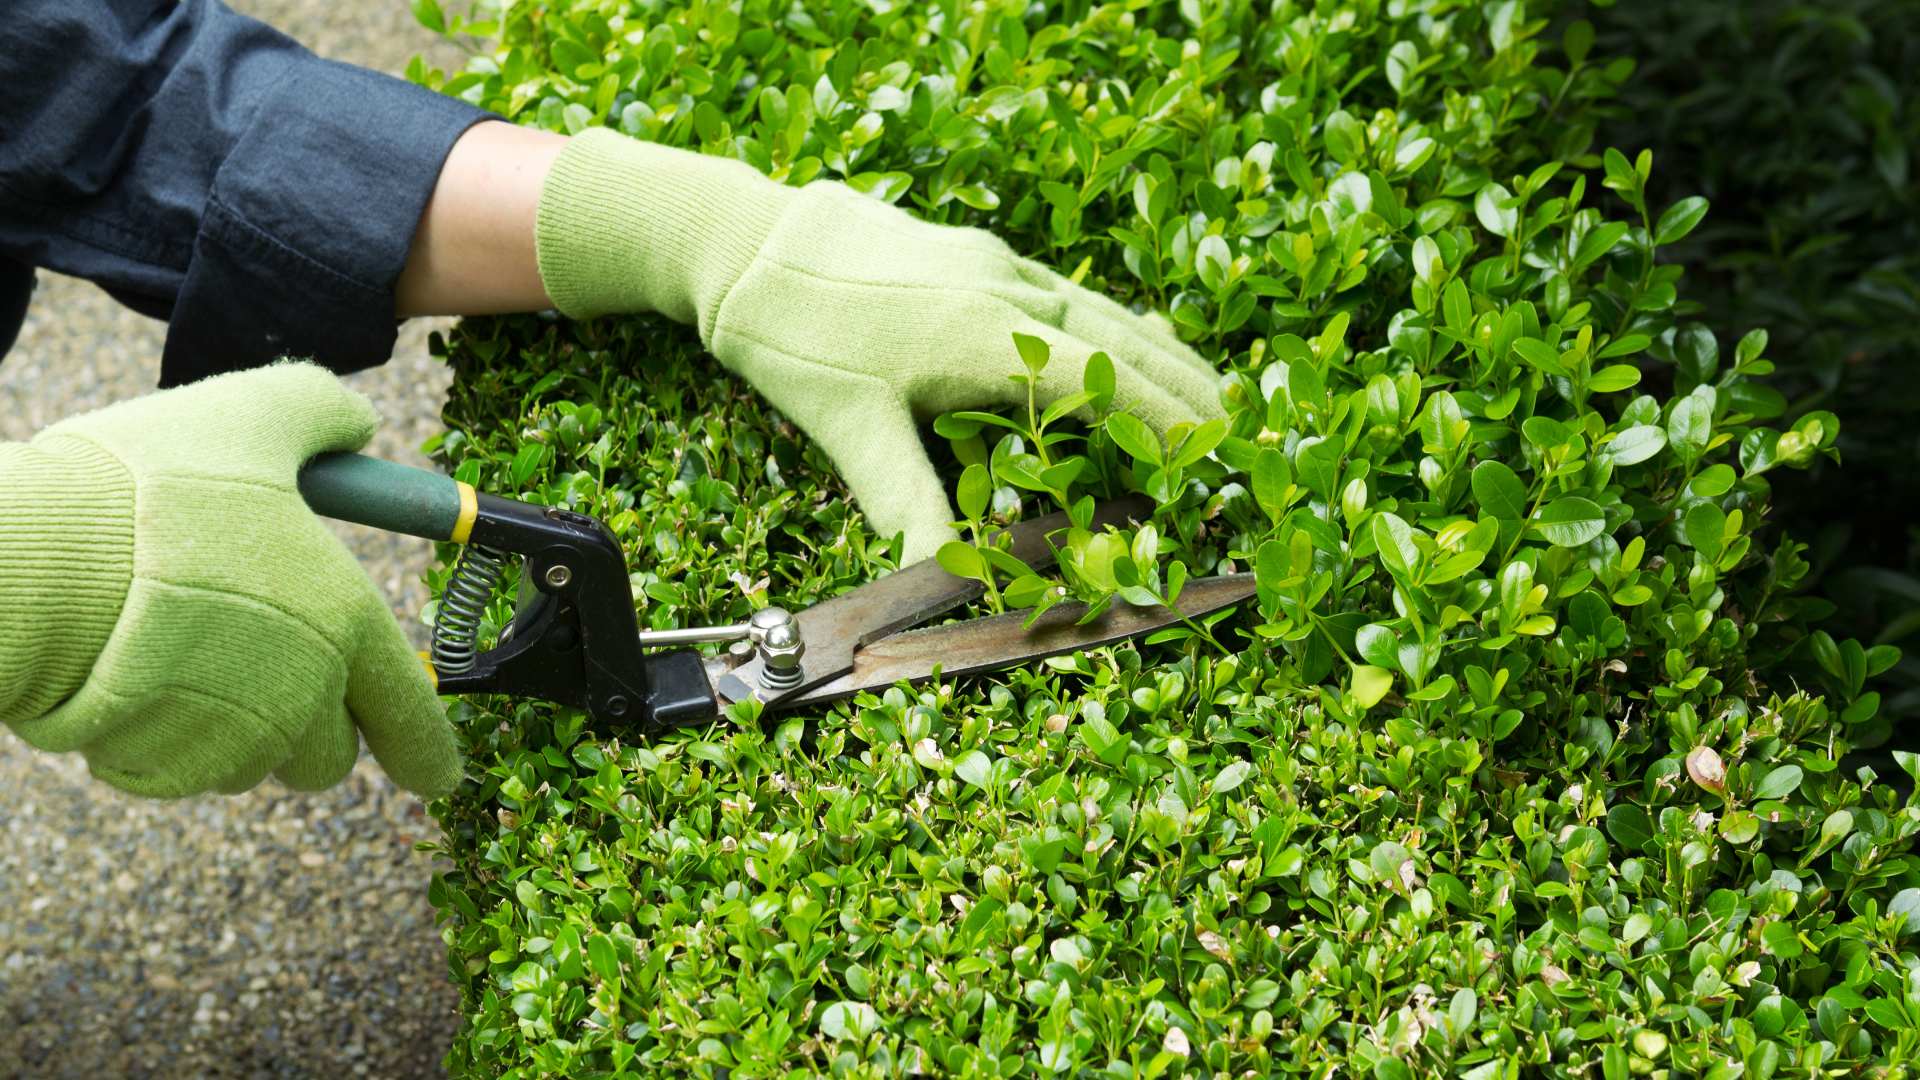 Professional trimming a shrub in a landscape bed in Macungie, PA.